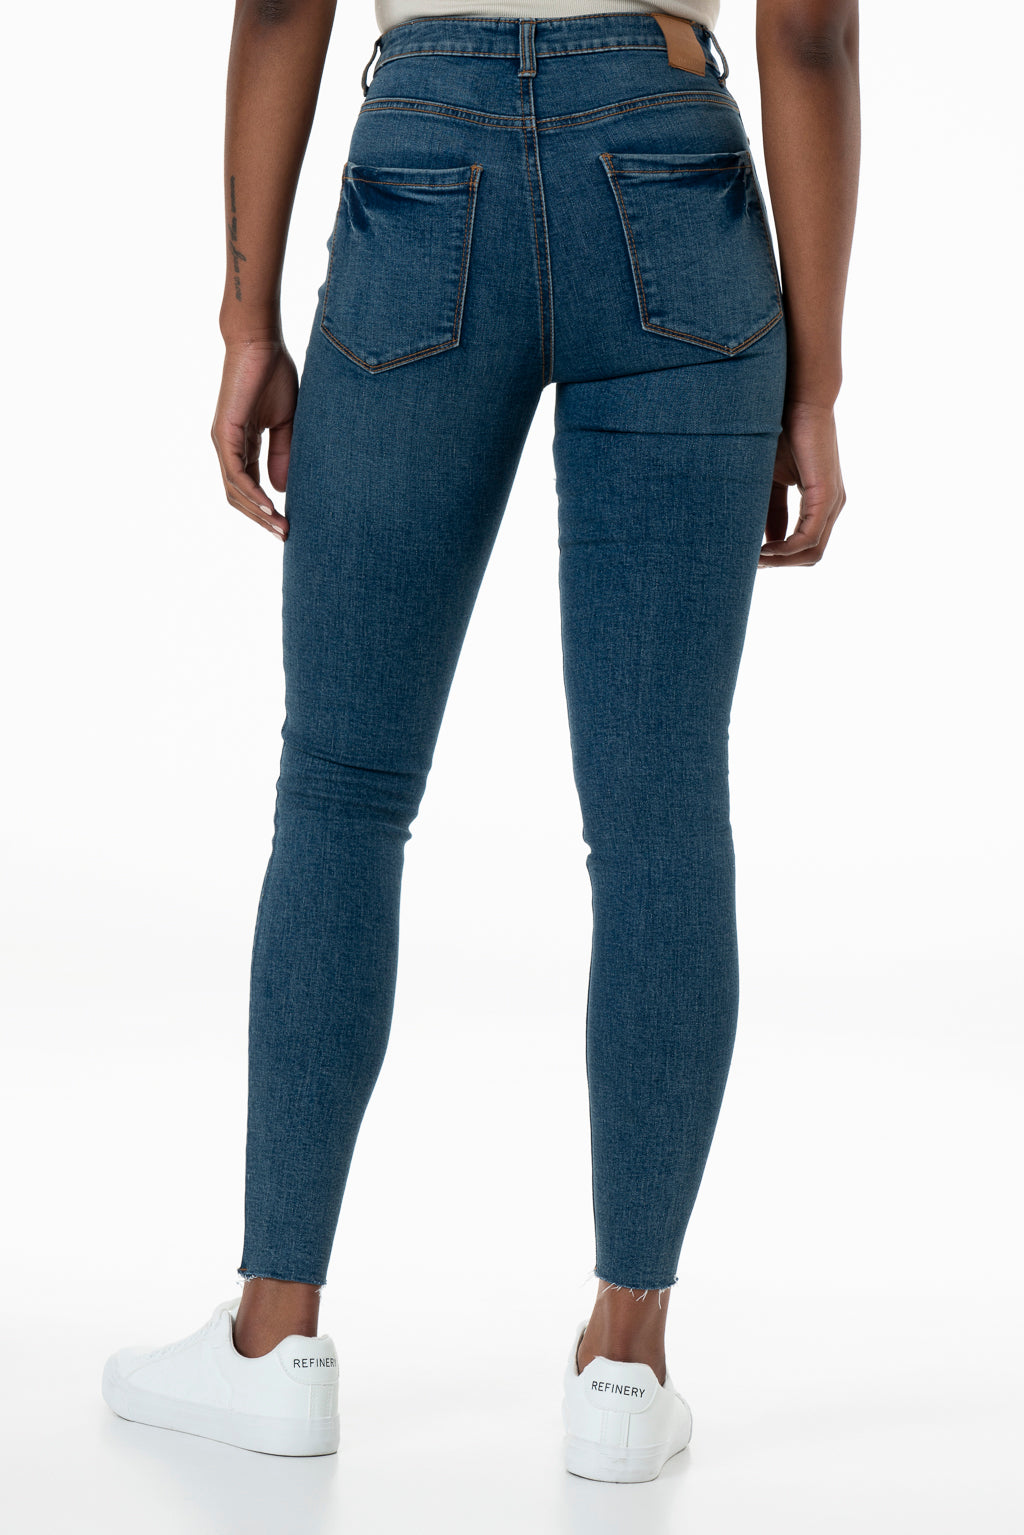 Rf05 Hi-Rise Skinny Jeans _ 142860 _ Mid Wash from REFINERY – Refinery